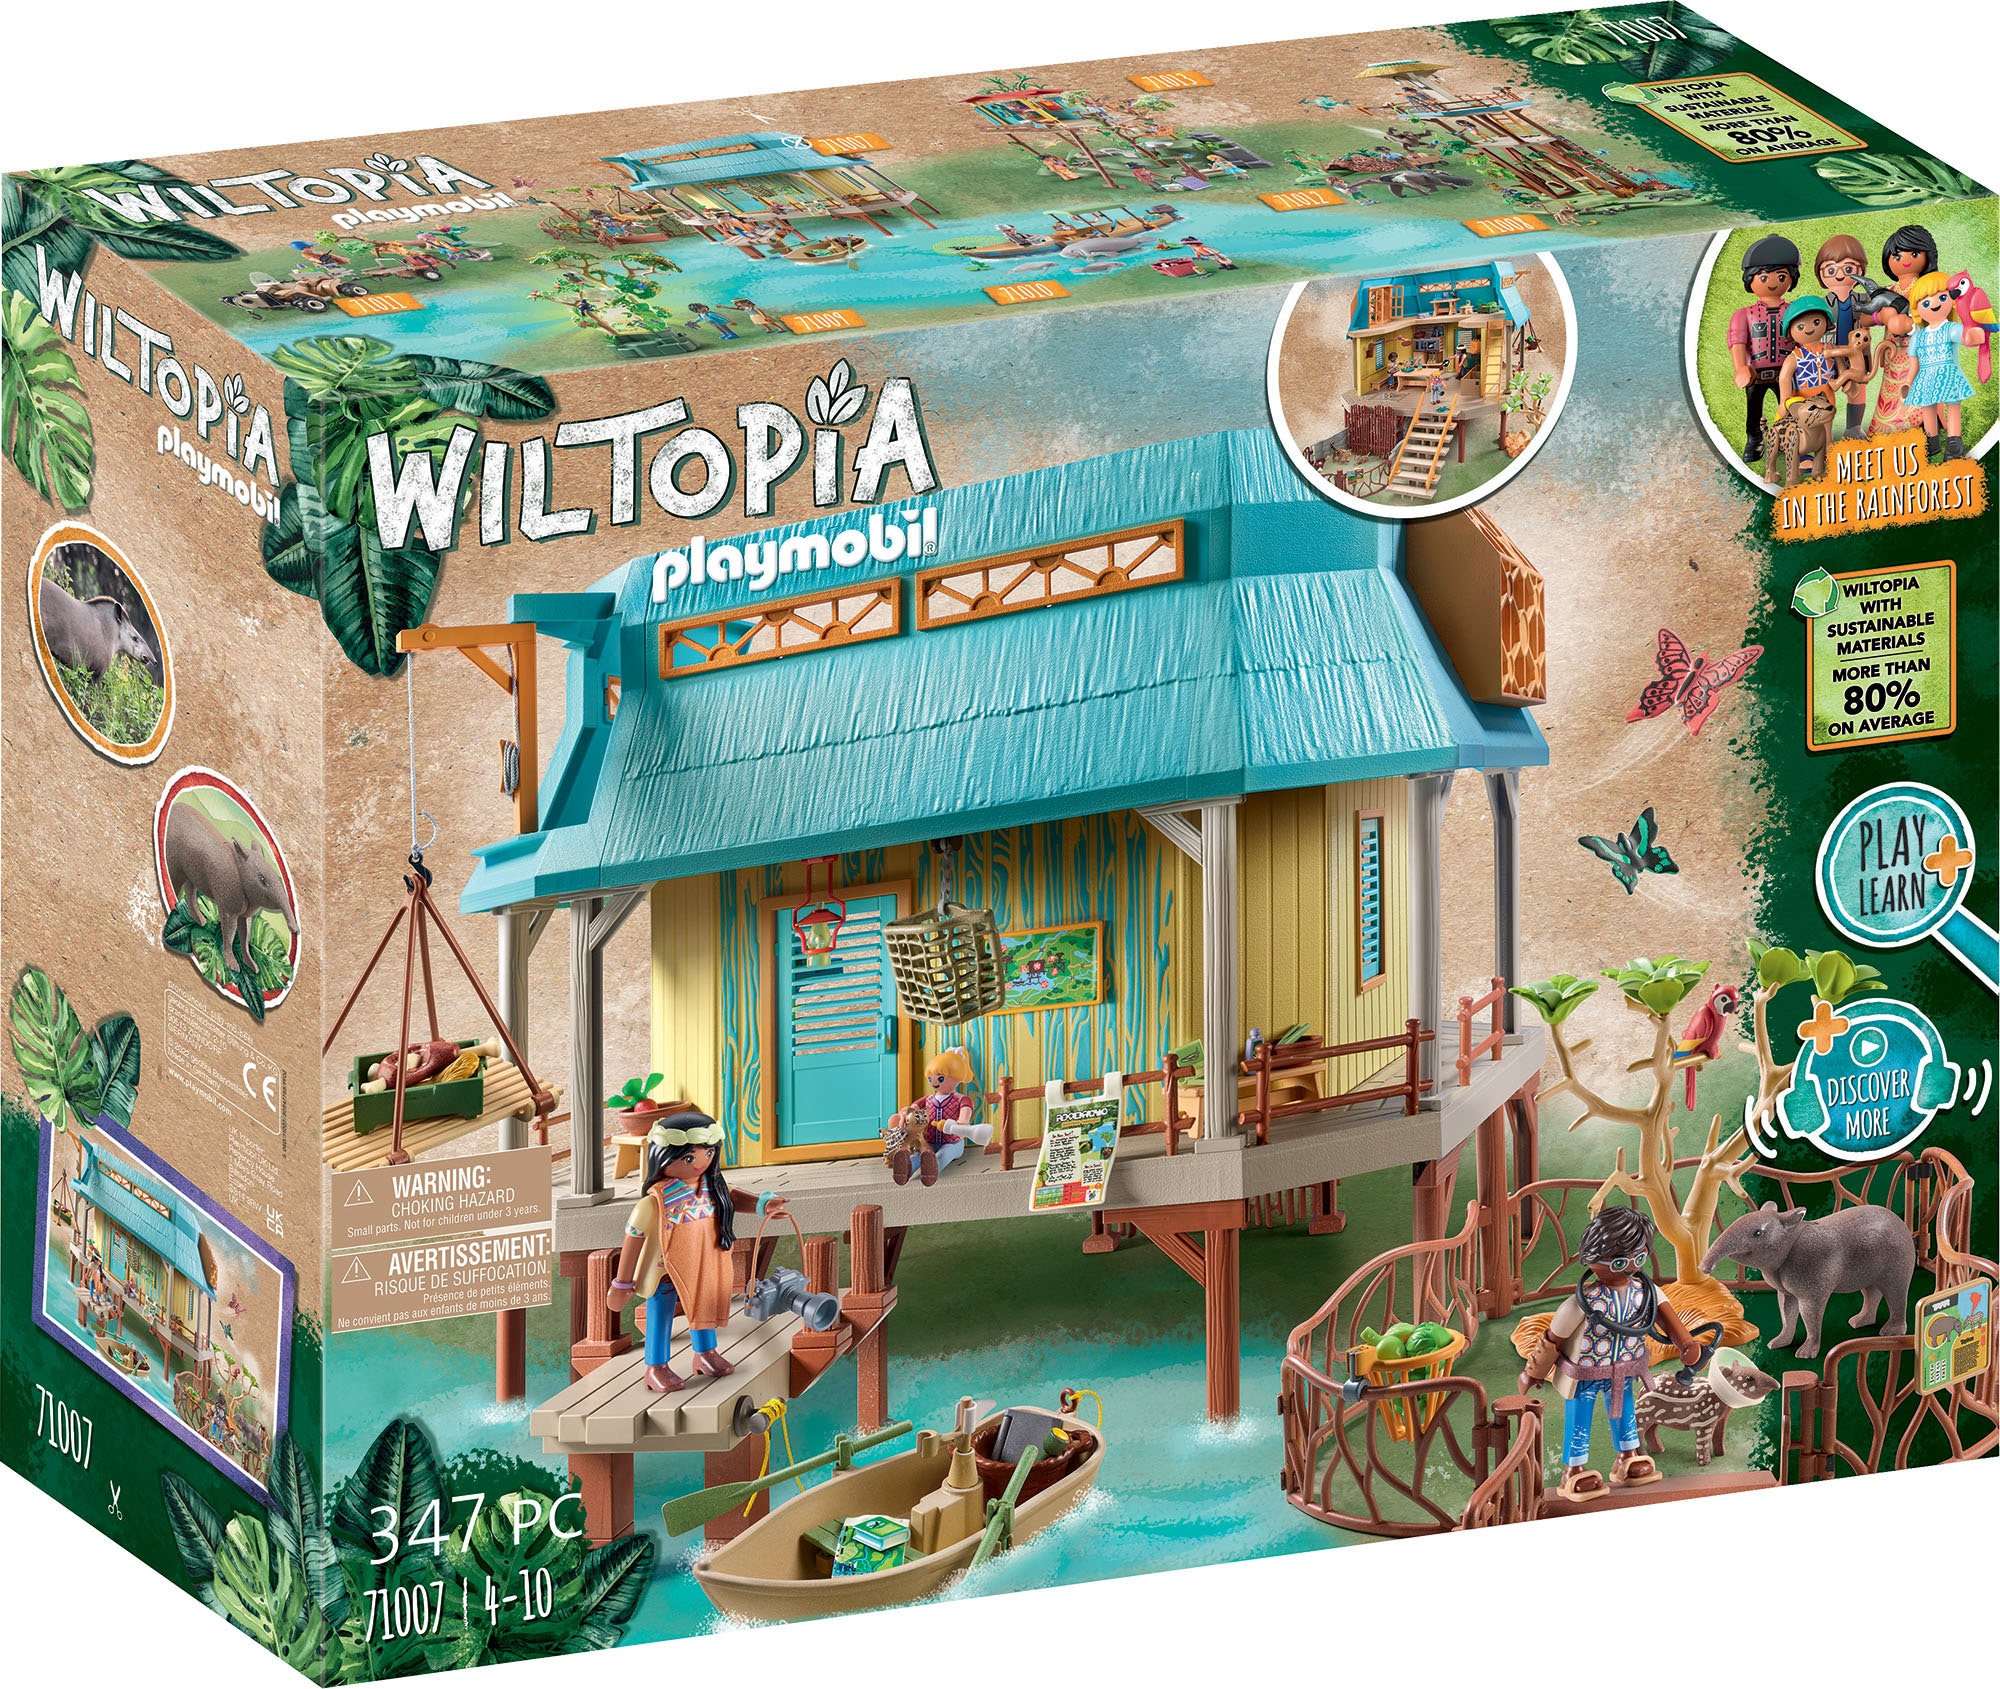 Playmobil® Konstruktions-Spielset »Wiltopia - Tierpflegestation (71007), Wiltopia«, (347 St.), teilweise aus recyceltem Material; Made in Europe